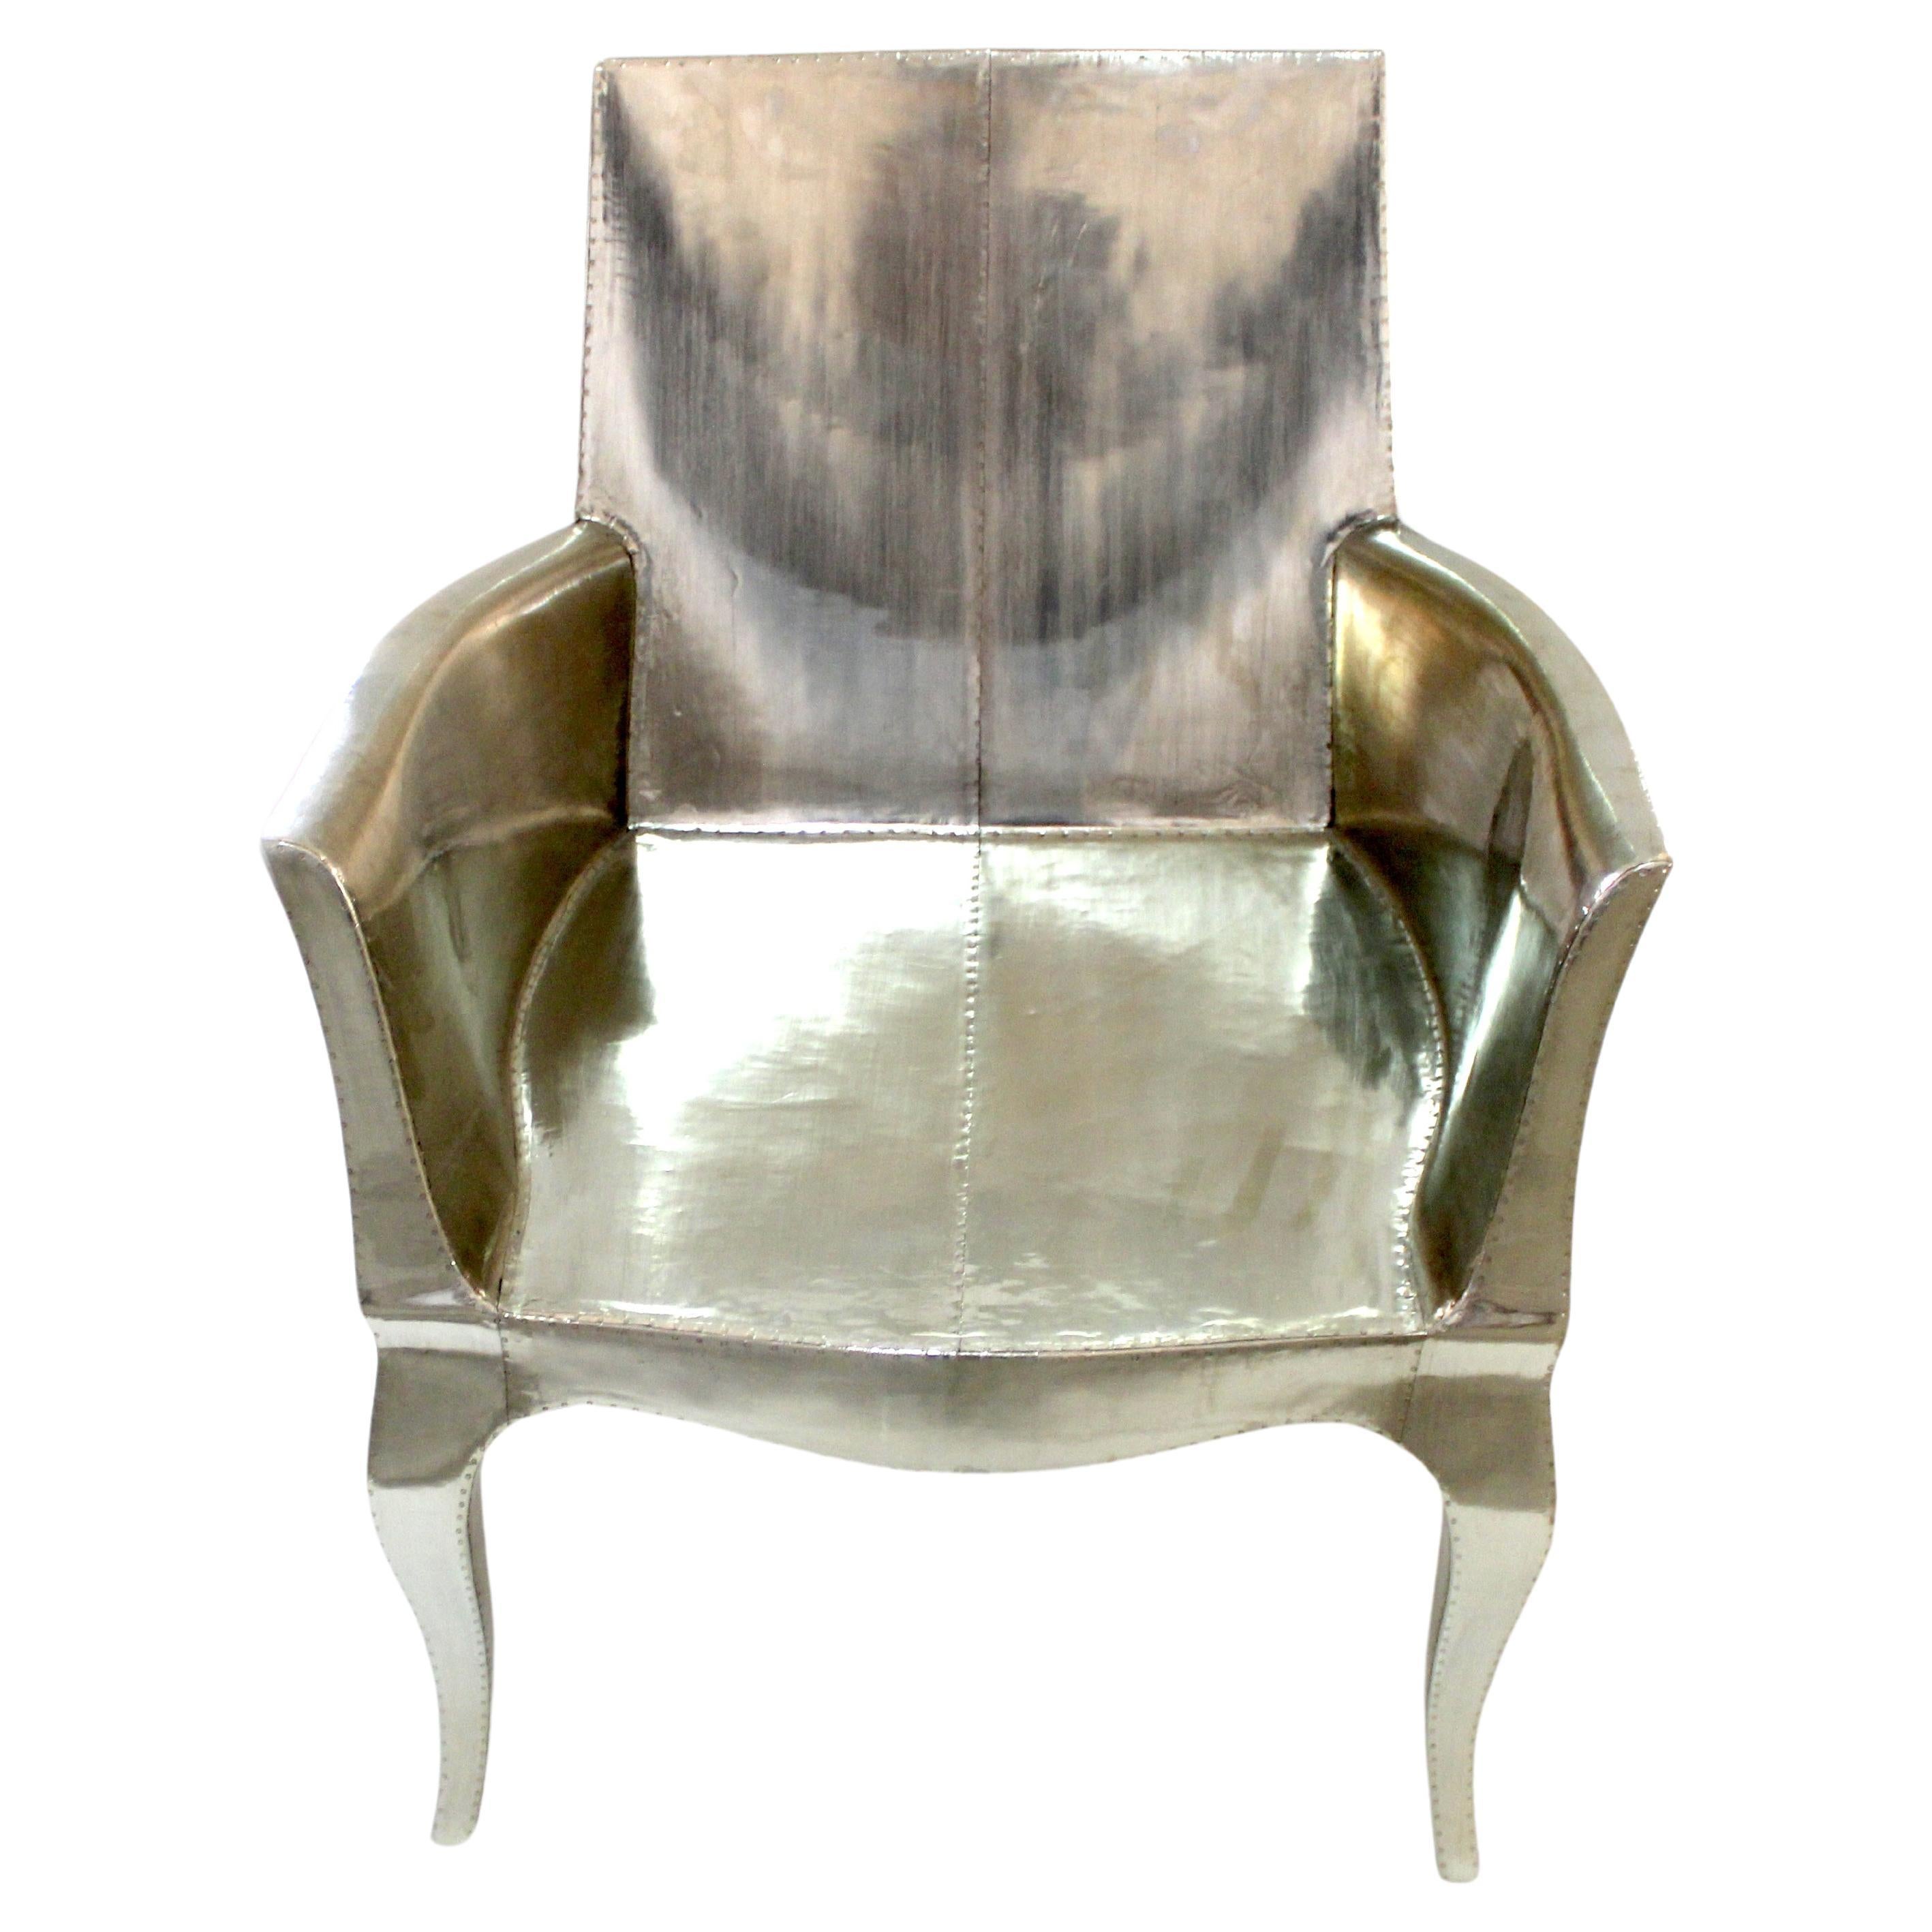 Art Deco Style Chairs in Smooth White Bronze by Paul Mathieu for S. Odegard